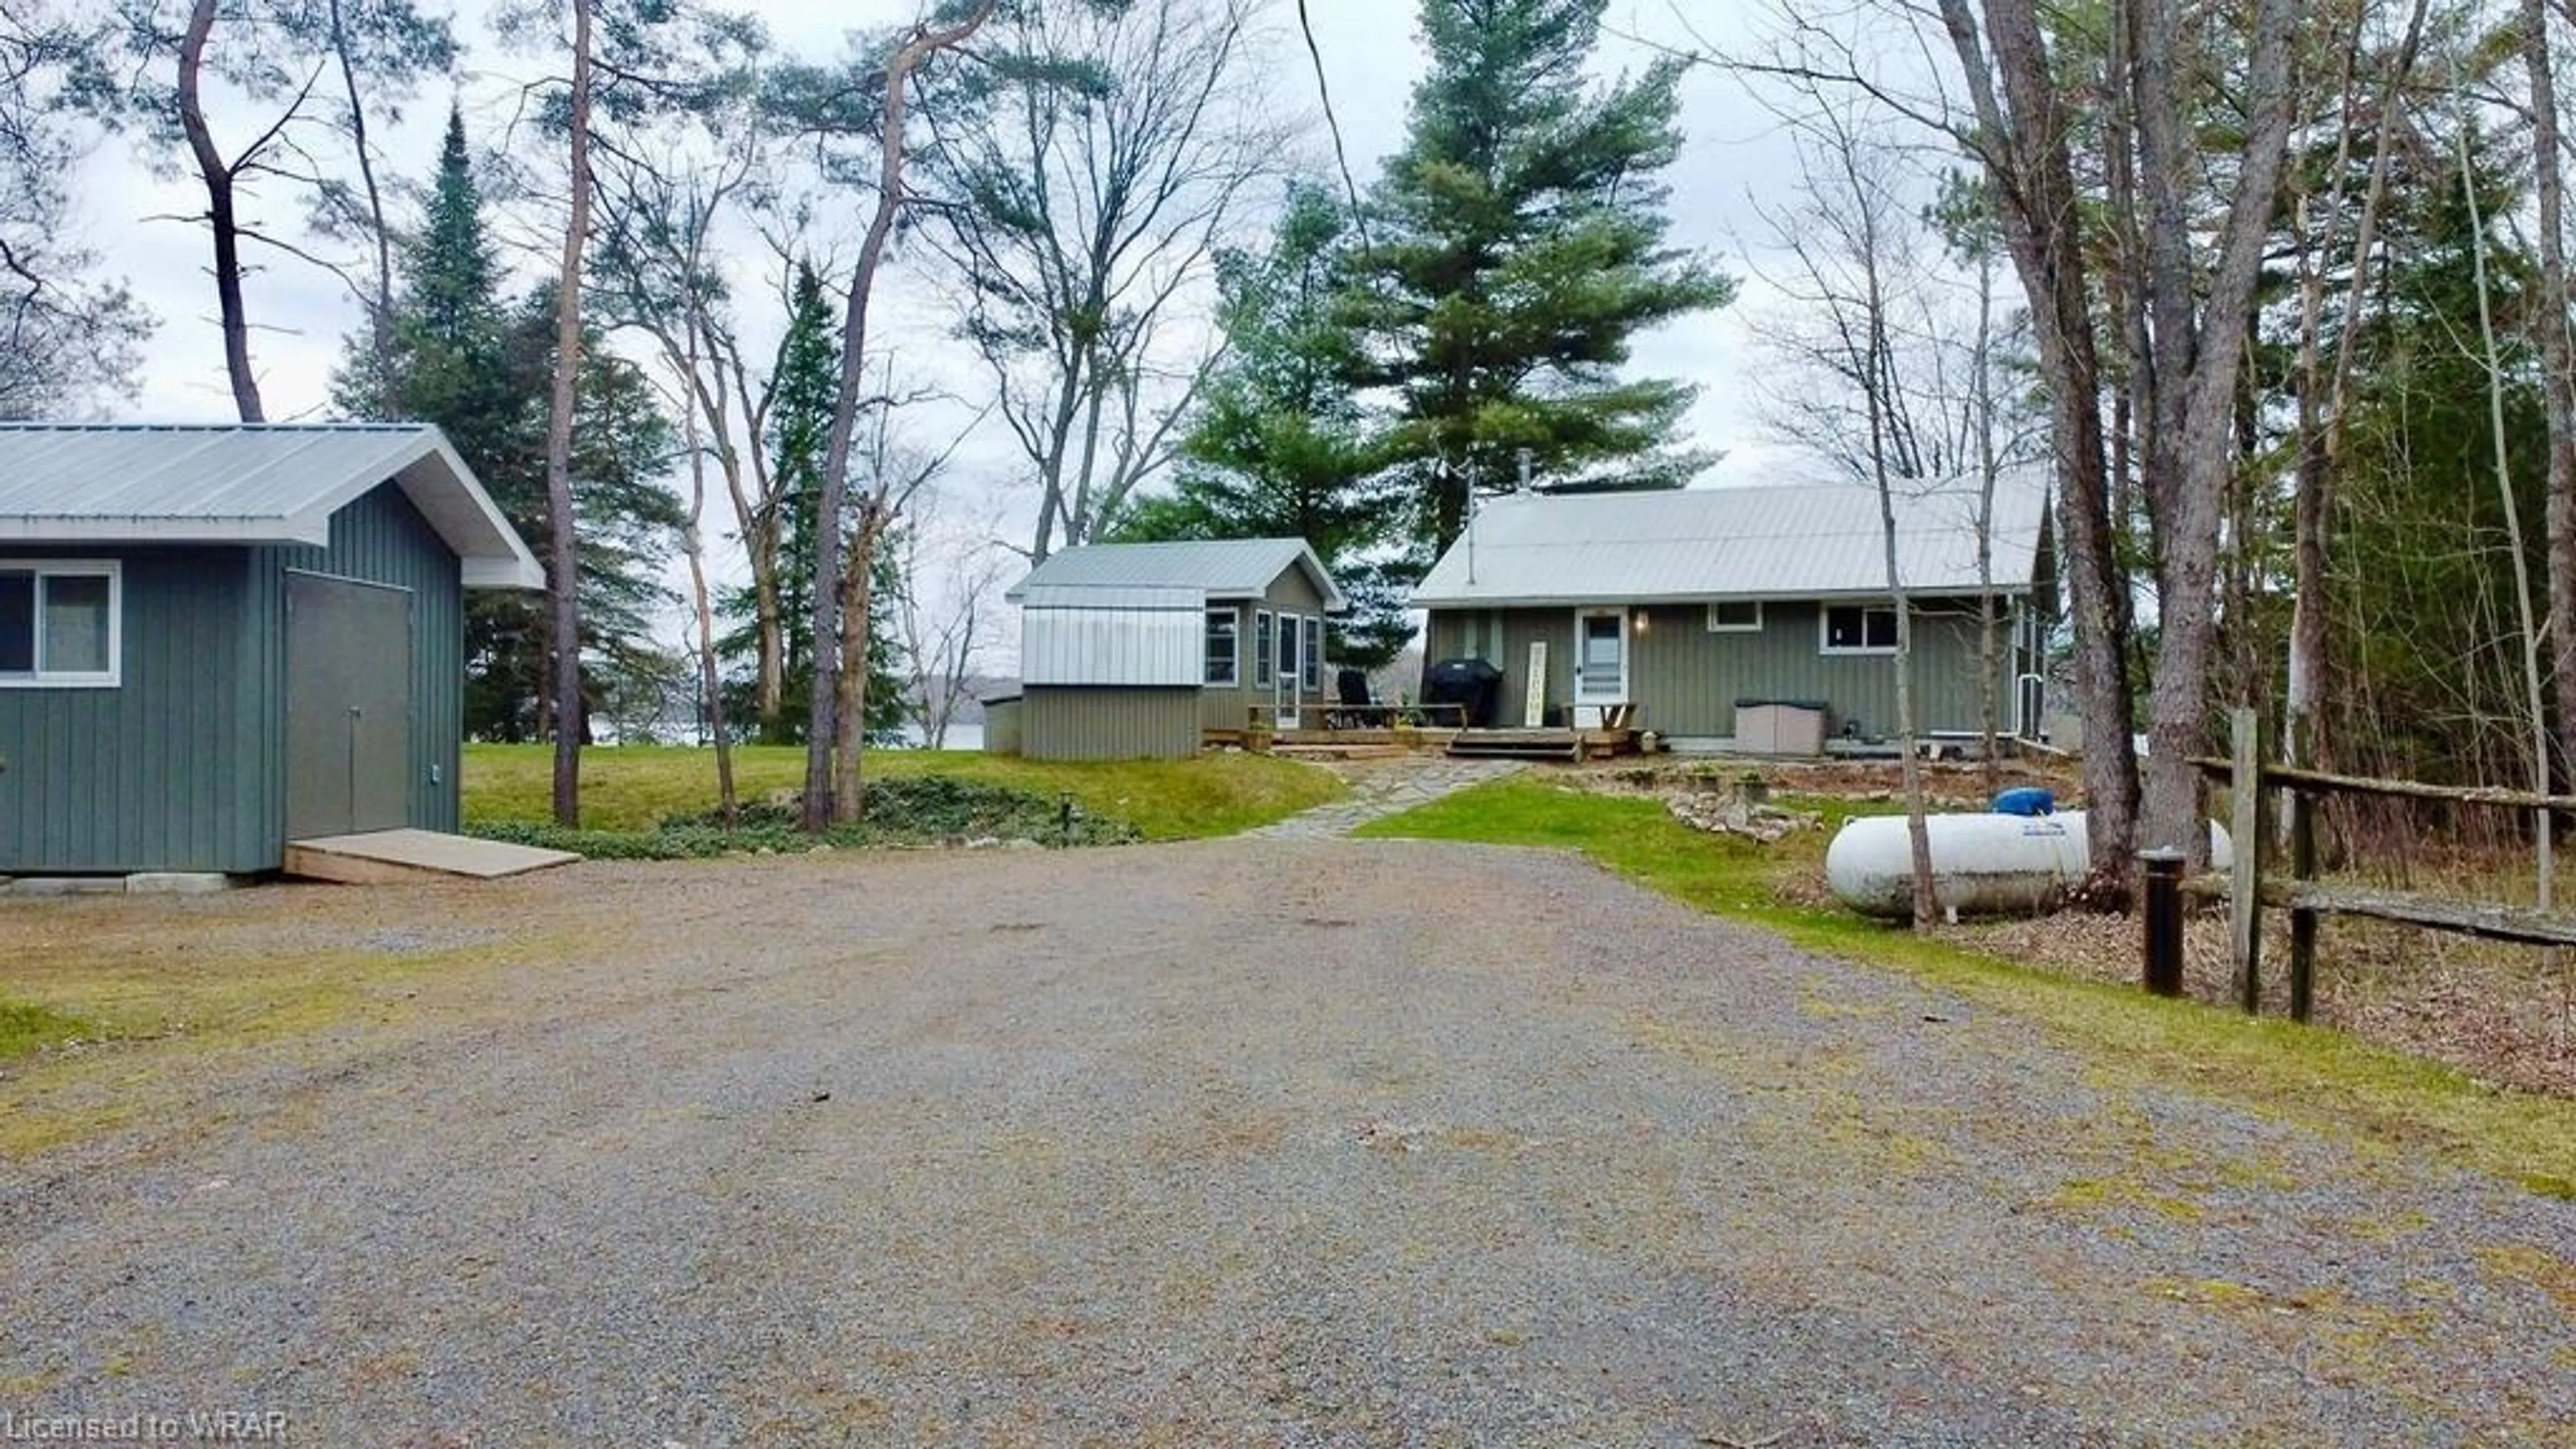 Outside view for 1054 Cove Rd #8, Utterson Ontario P0B 1M0